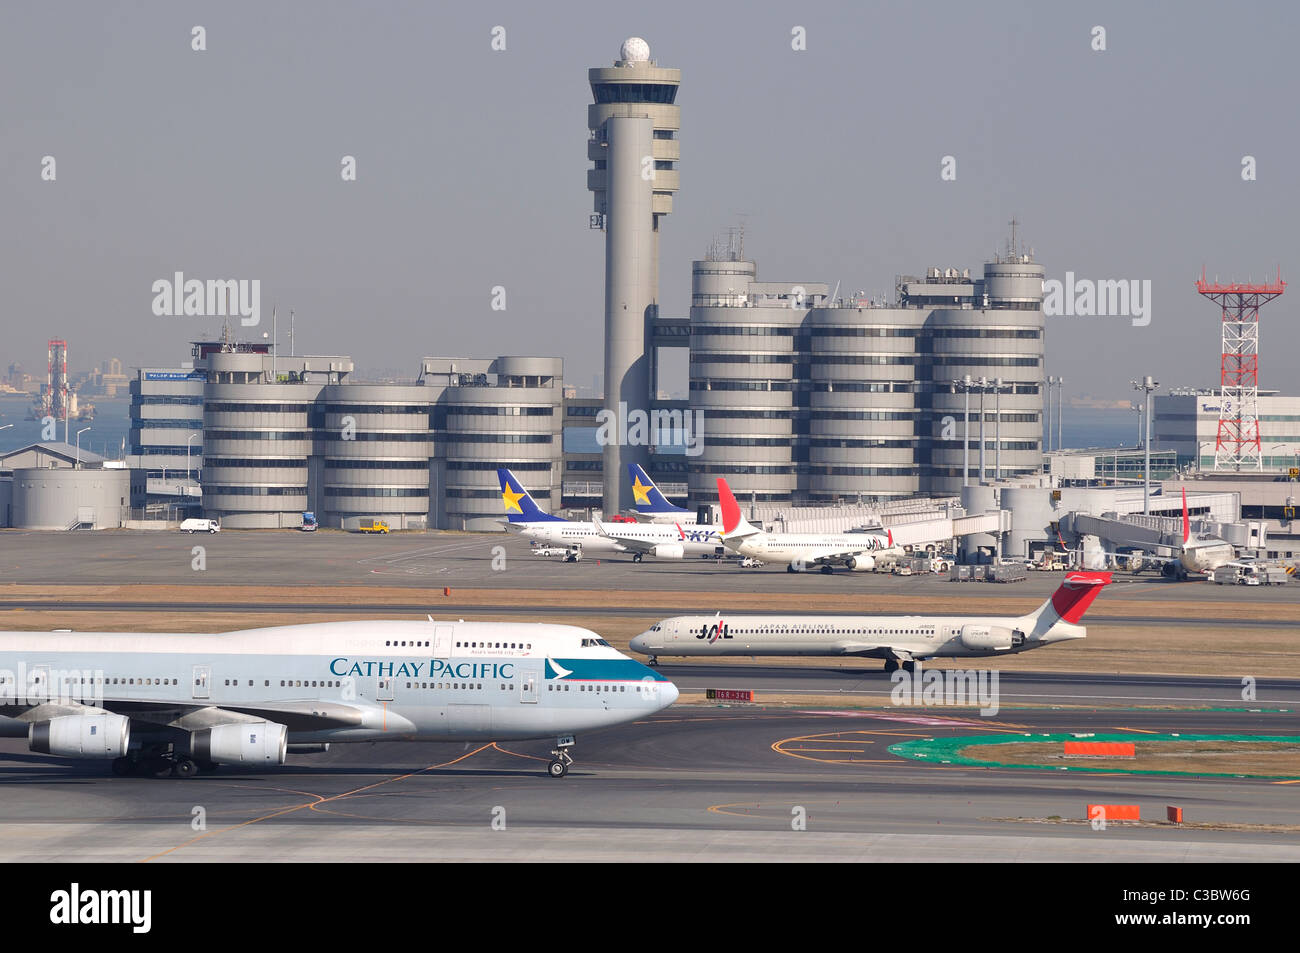 Aircraft / airplanes on the tarmac with tower in background at 'Haneda' Tokyo International Airport (Japan) Stock Photo